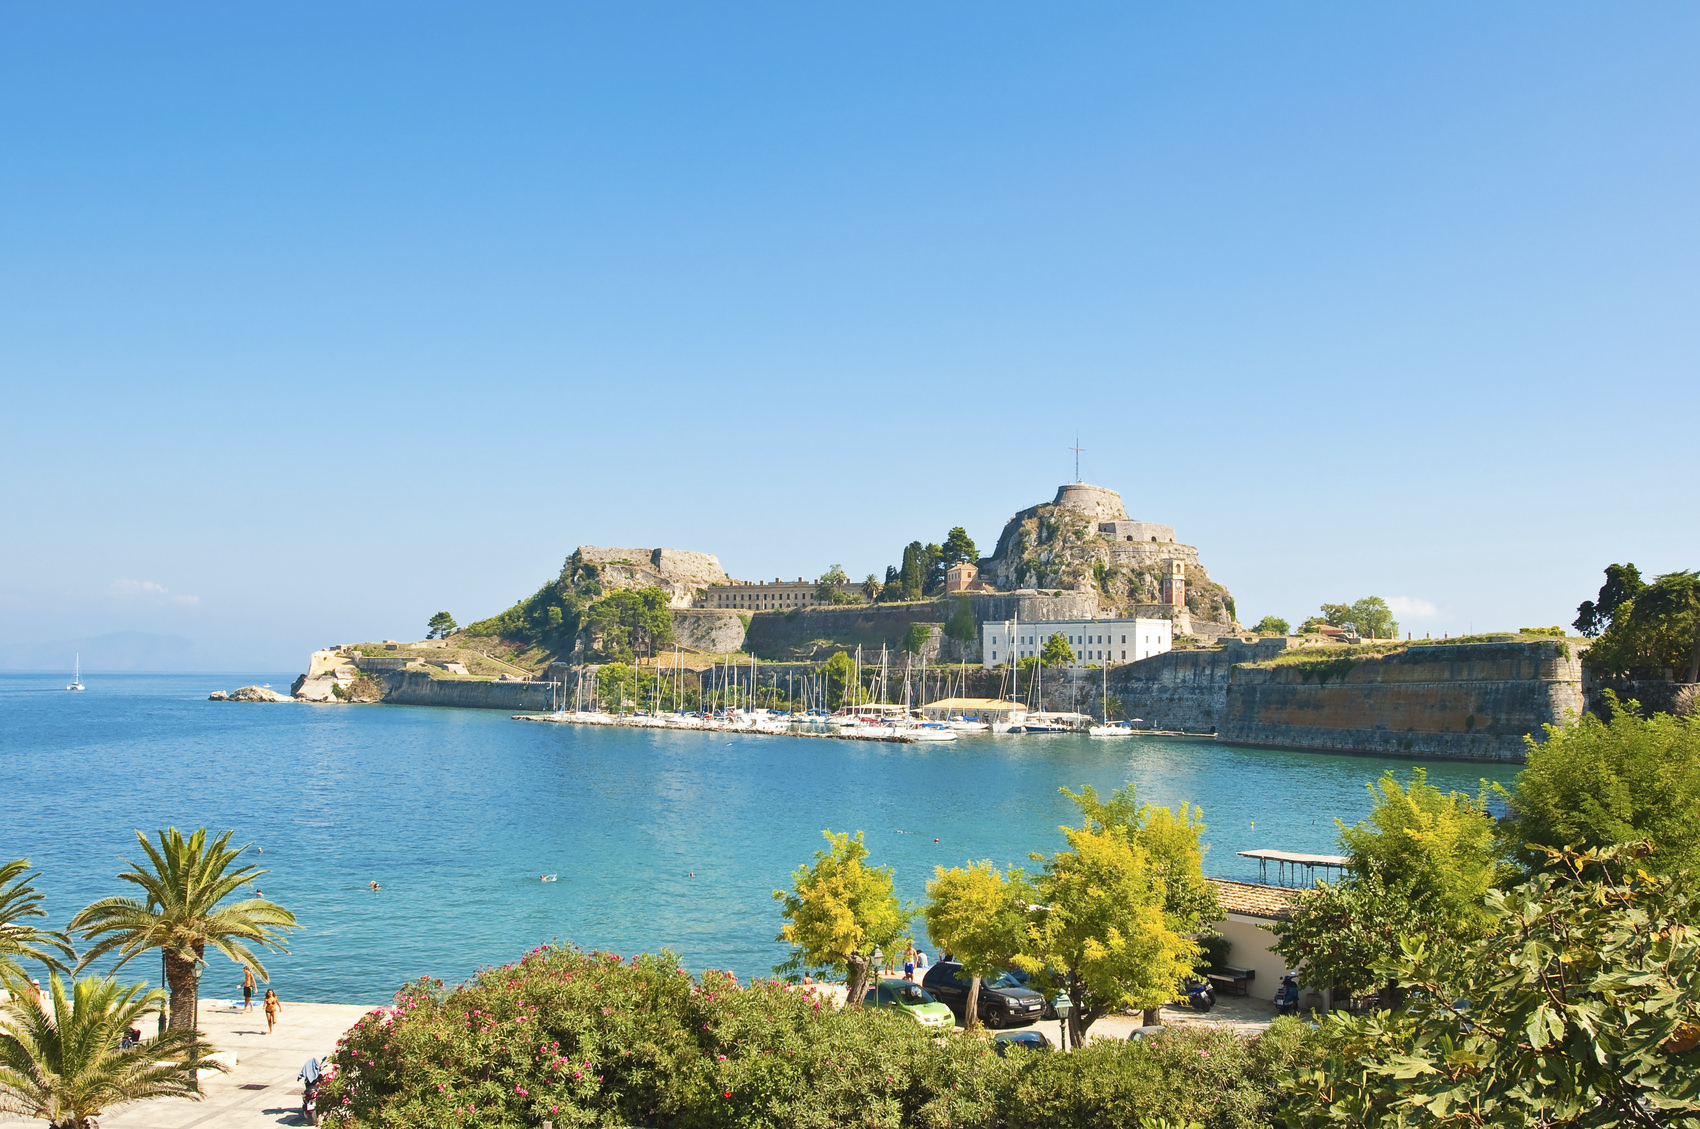 Corfu is the second largest of the Ionian Islands, including its small satellite islands, Greece.